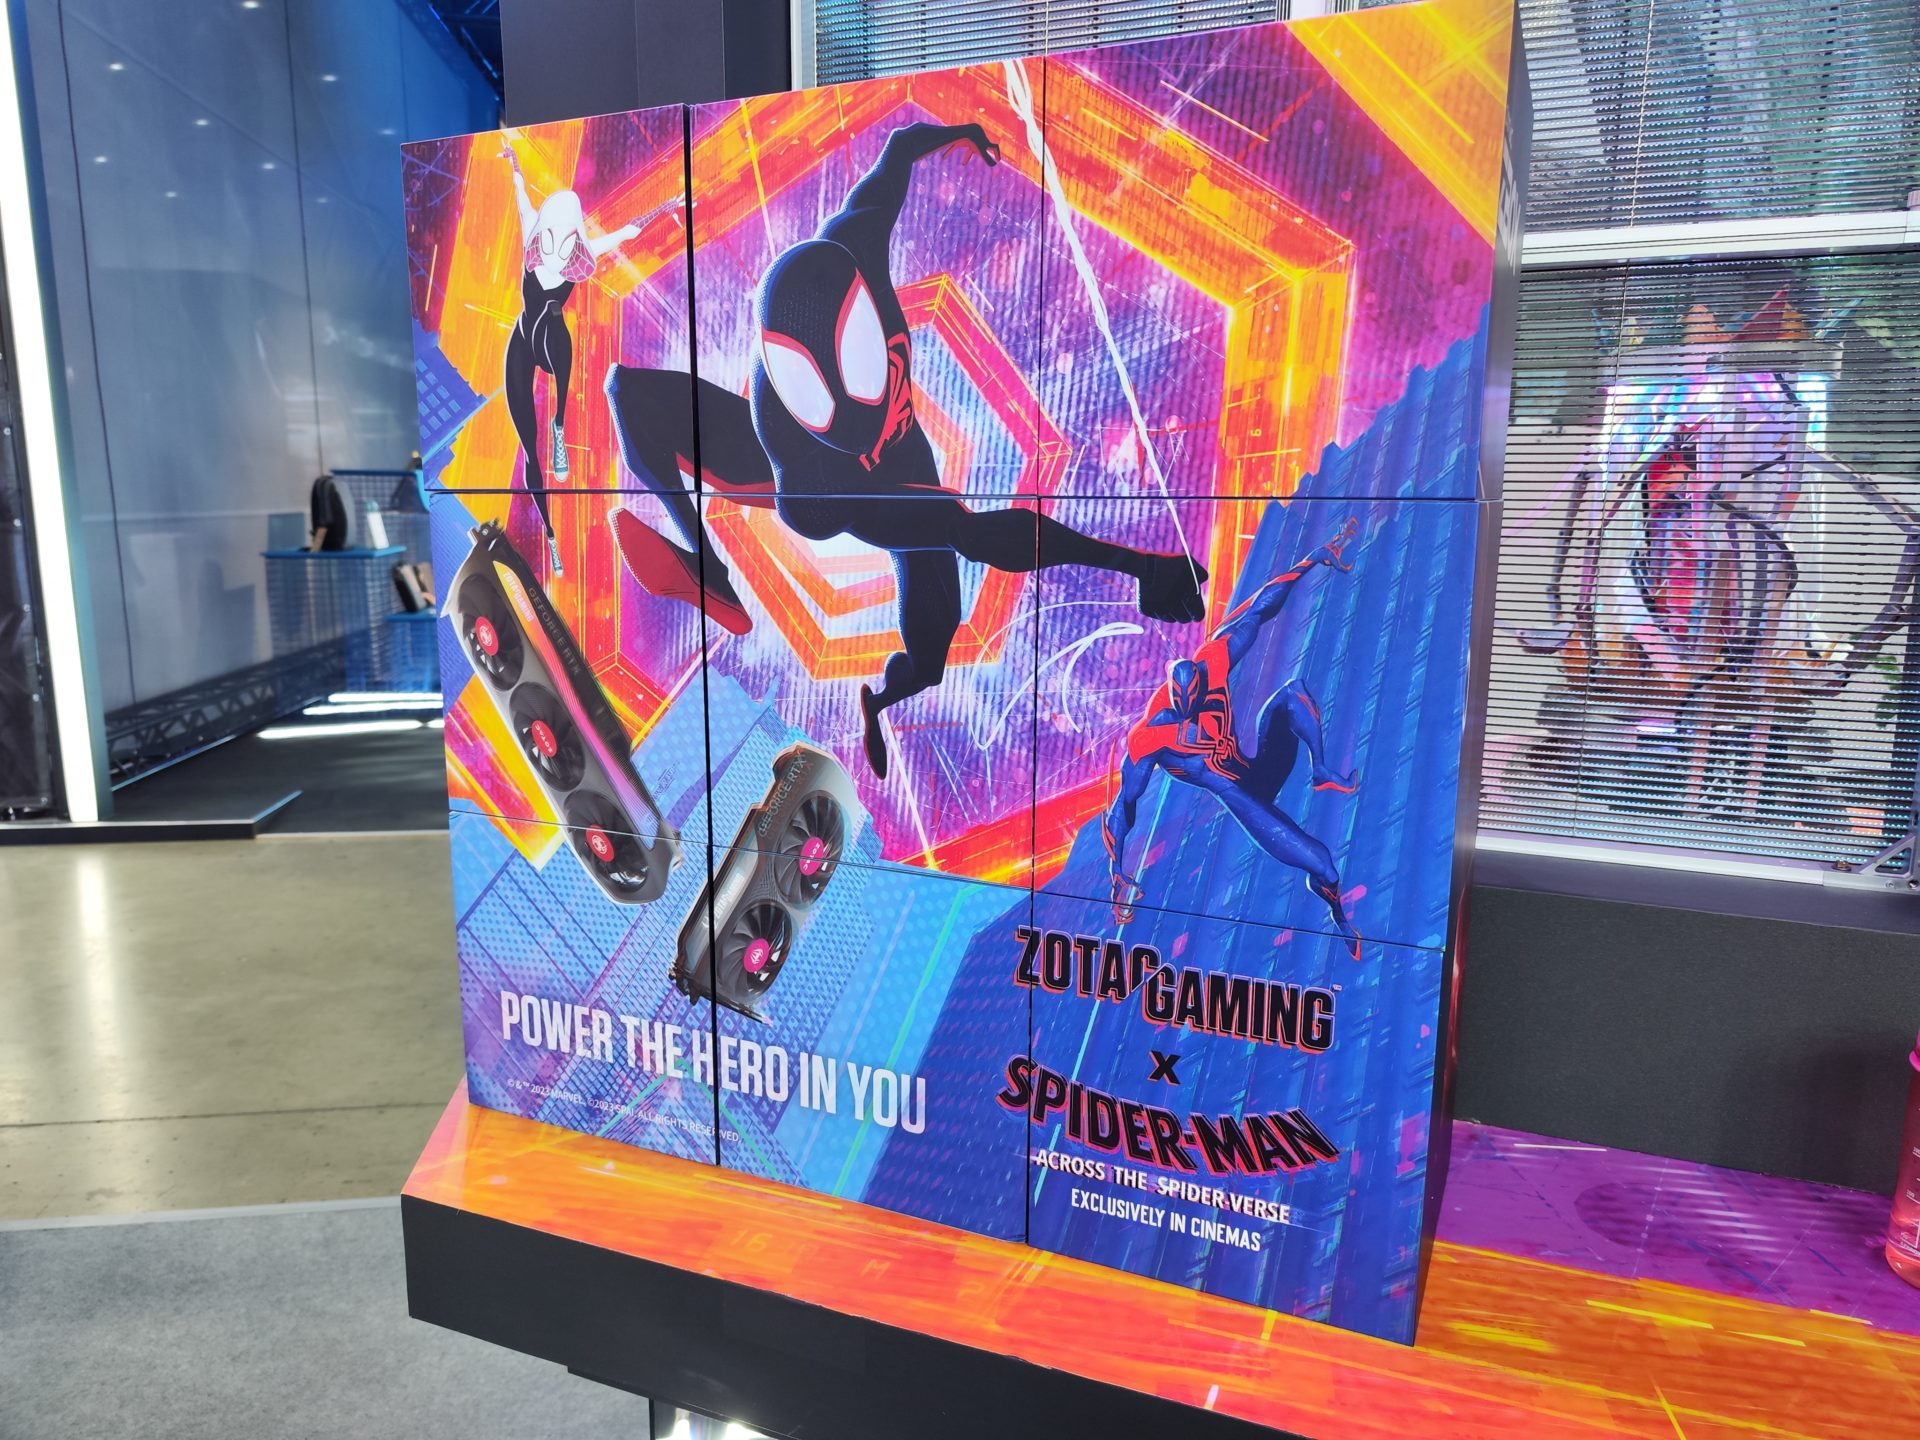 Limited Edition ZOTAC GAMING x Spider-Man: Across the Spider-Verse